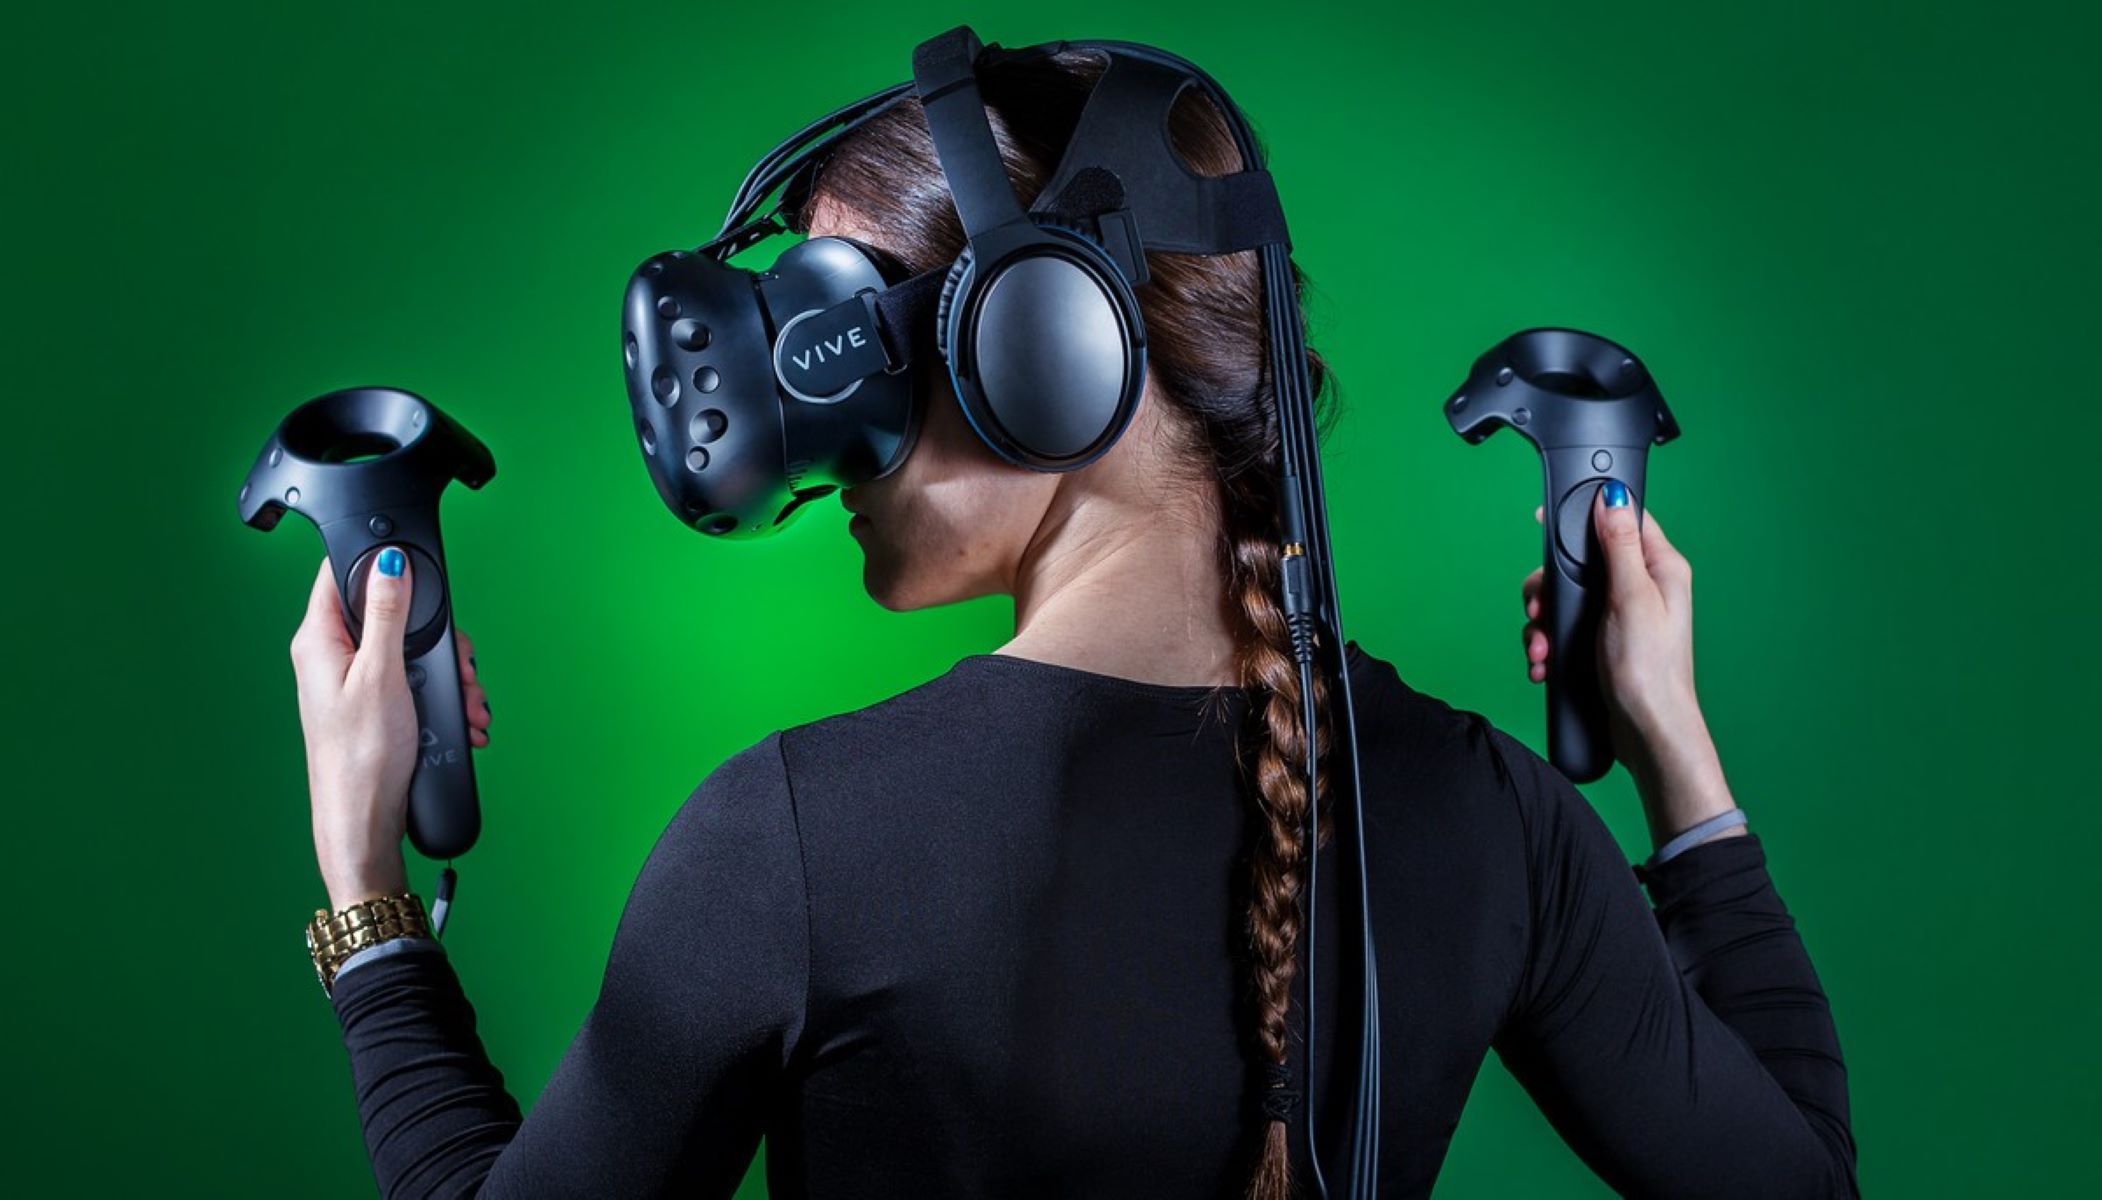 how-far-is-the-screen-from-your-face-on-the-htc-vive